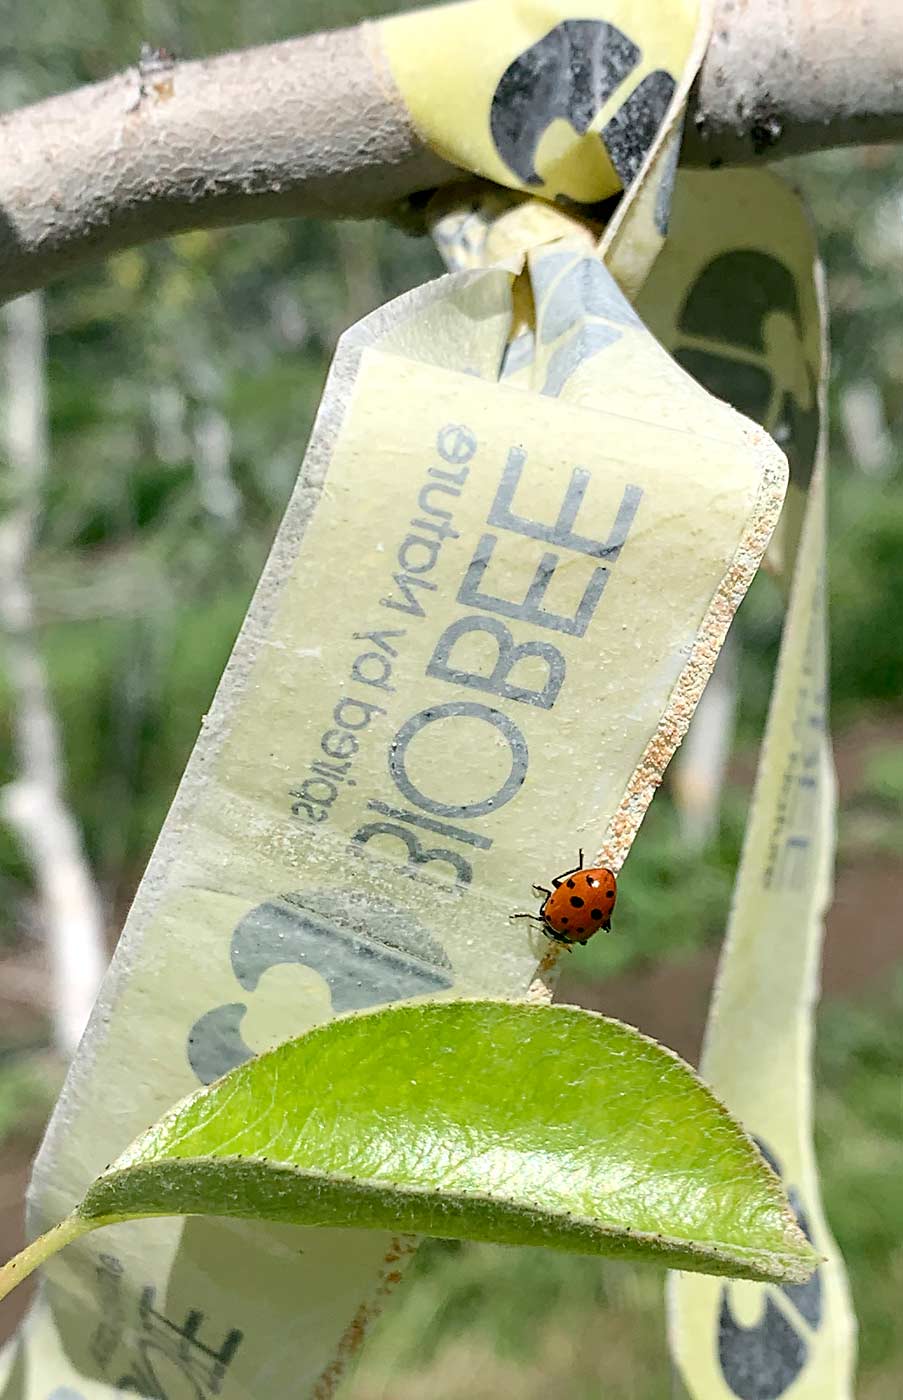 A lady beetle stops for a snack on a strip of tape coated with dormant brine shrimp eggs, which the BioBee insectary developed to encourage predator insects to stick around. So far, it’s unclear how much food supplements can boost the efficacy of releases in Washington orchards, Schmidt-Jeffris said. (Courtesy Rebecca Schmidt-Jeffris)